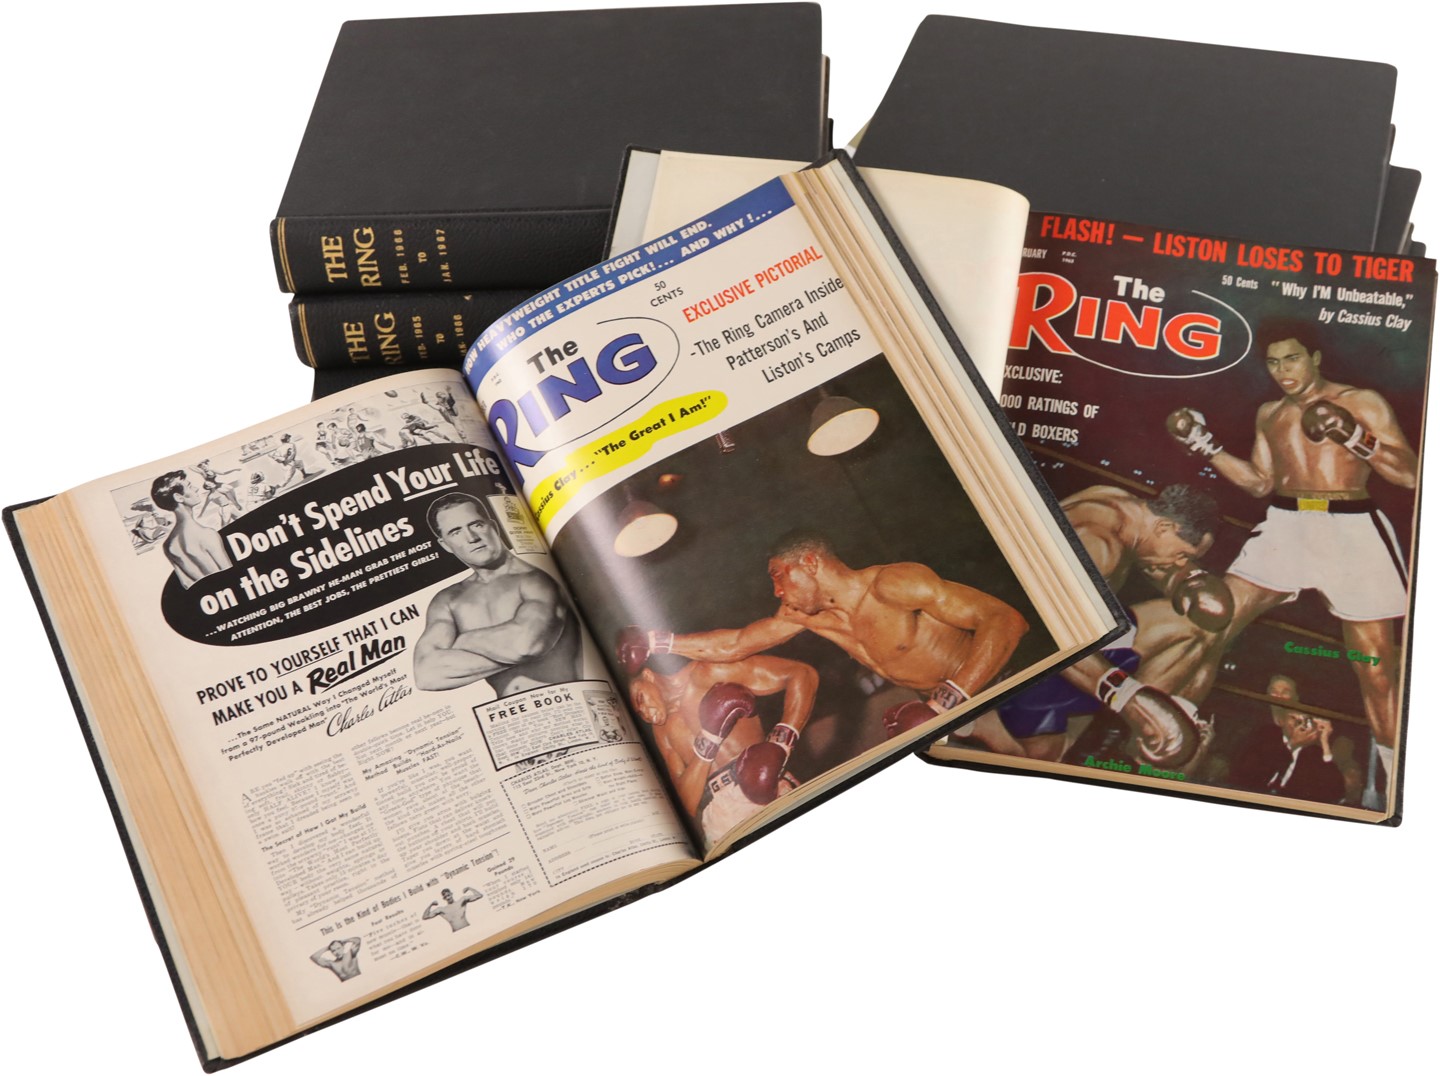 Muhammad Ali & Boxing - Collection of The Ring Boxing Magazine Bound Volumes Including (8) Autographs (9)